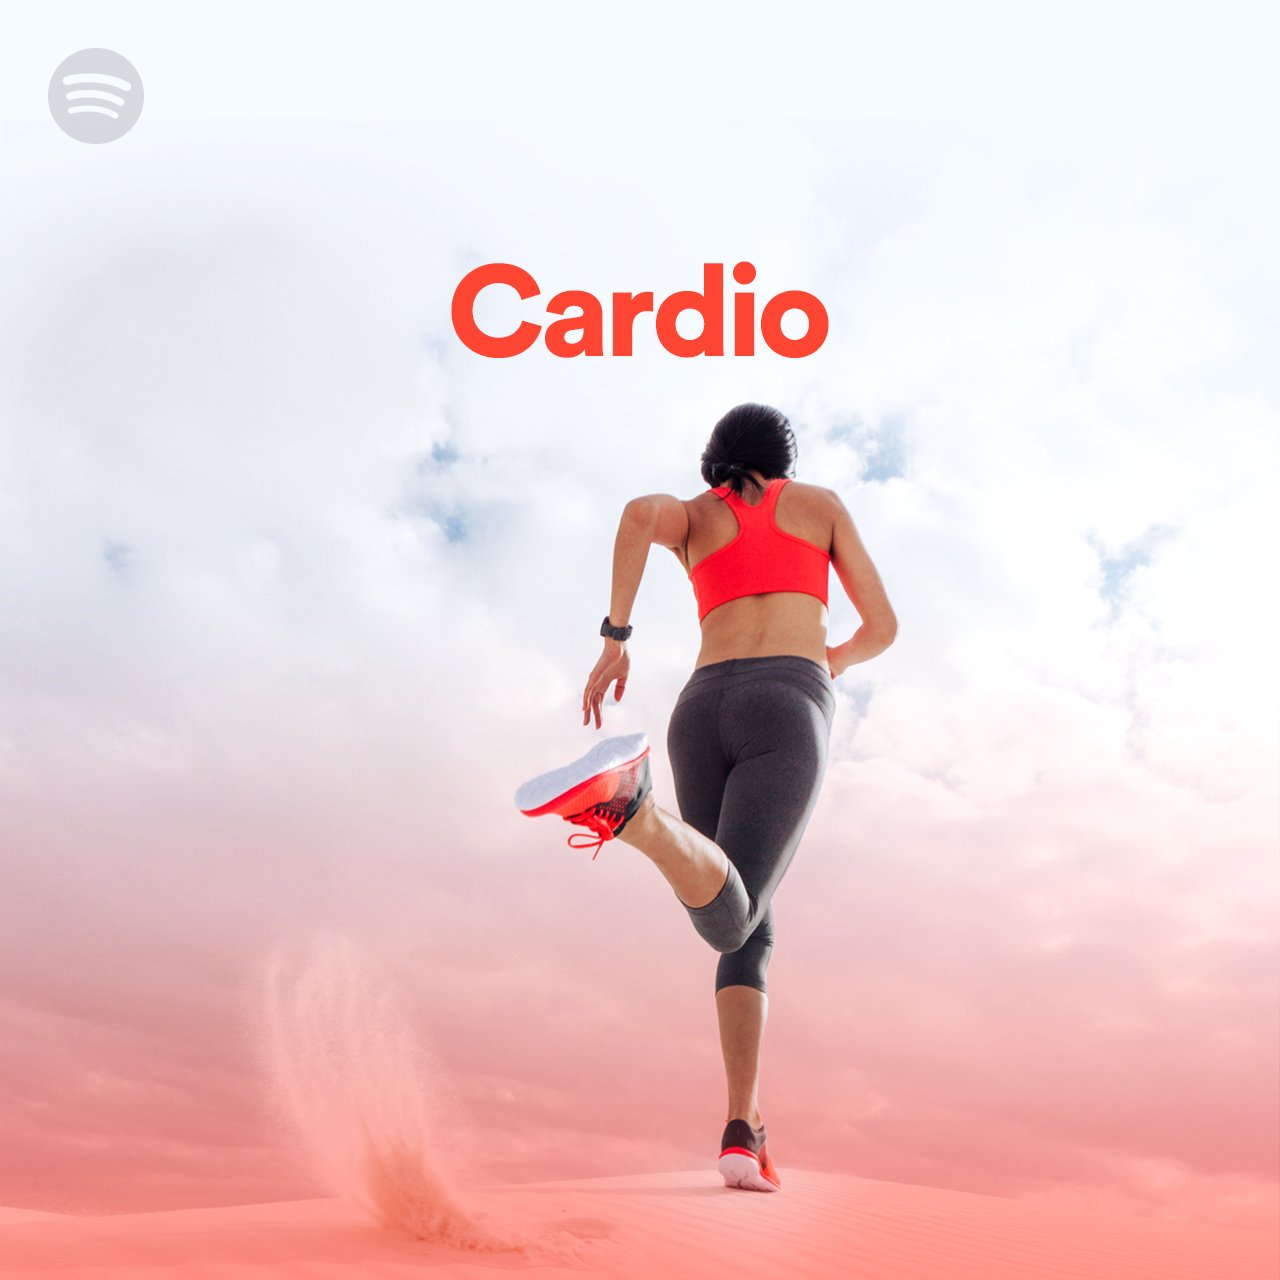 Spotify Shares Some Favourite Workout Tracks To Kick-Off Your 2021 Routine